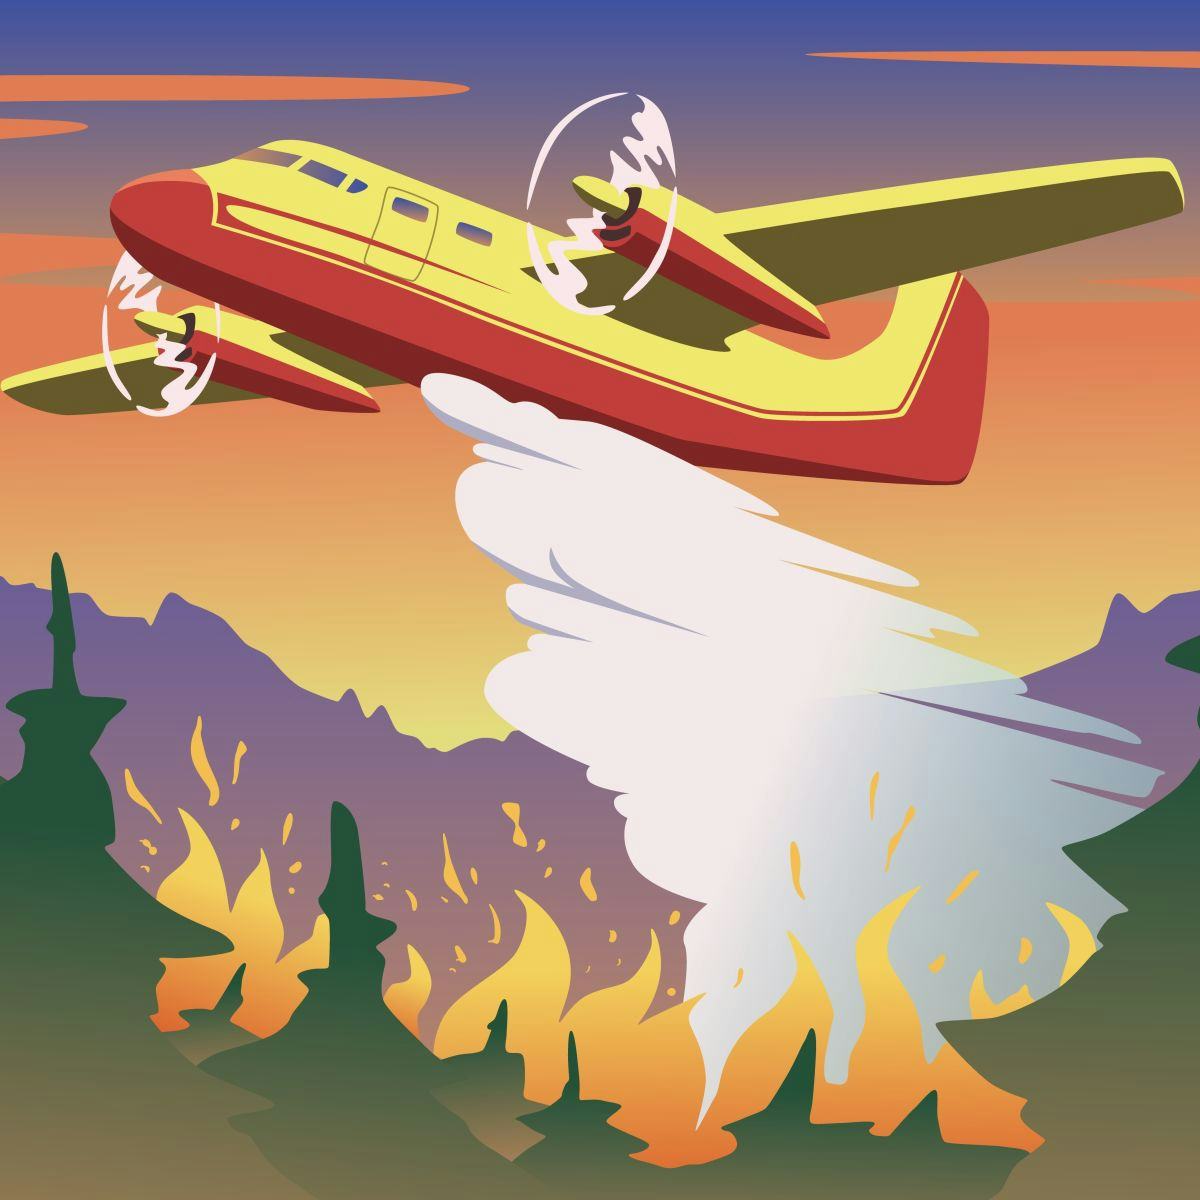 drawing of seaplane fighting fire